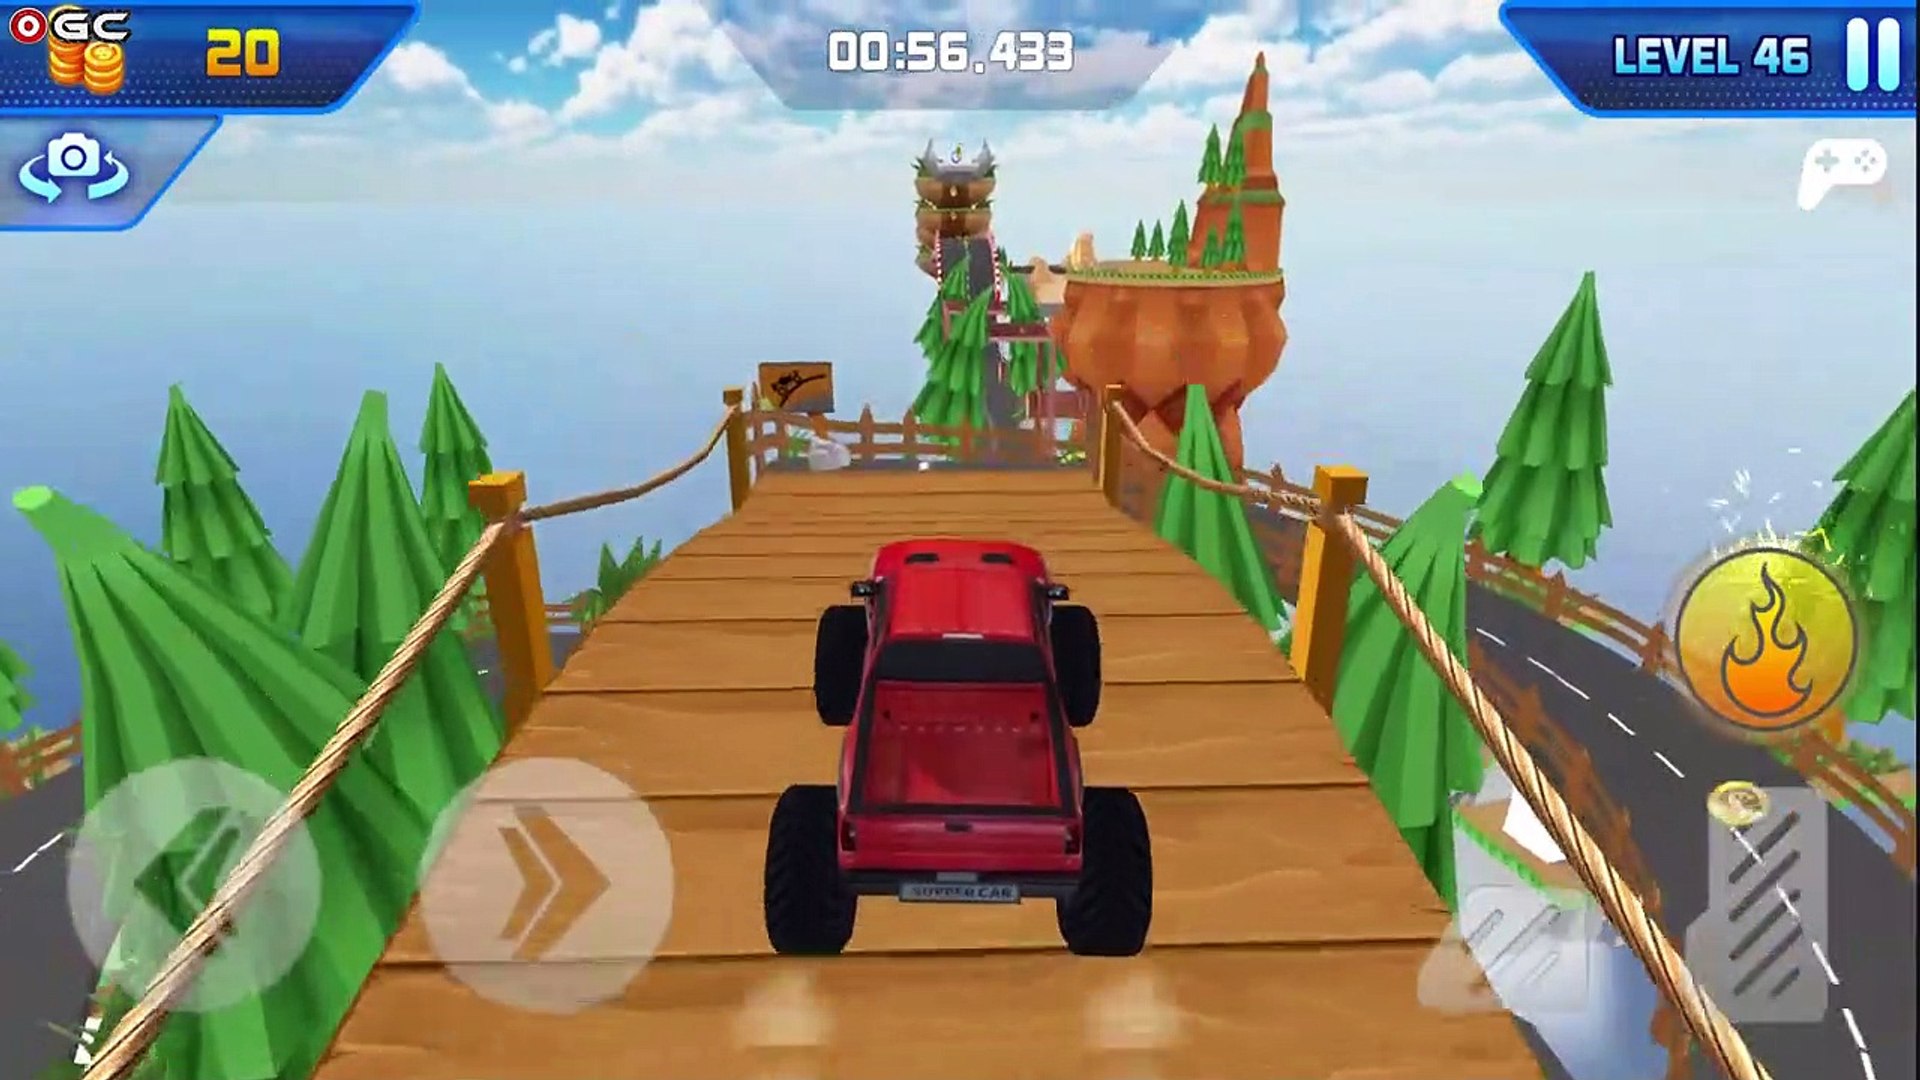 Mountain Climb Racing Sea Adventure Stunt - Impossible Car Race Games -  Android GamePlay #4 - Vidéo Dailymotion